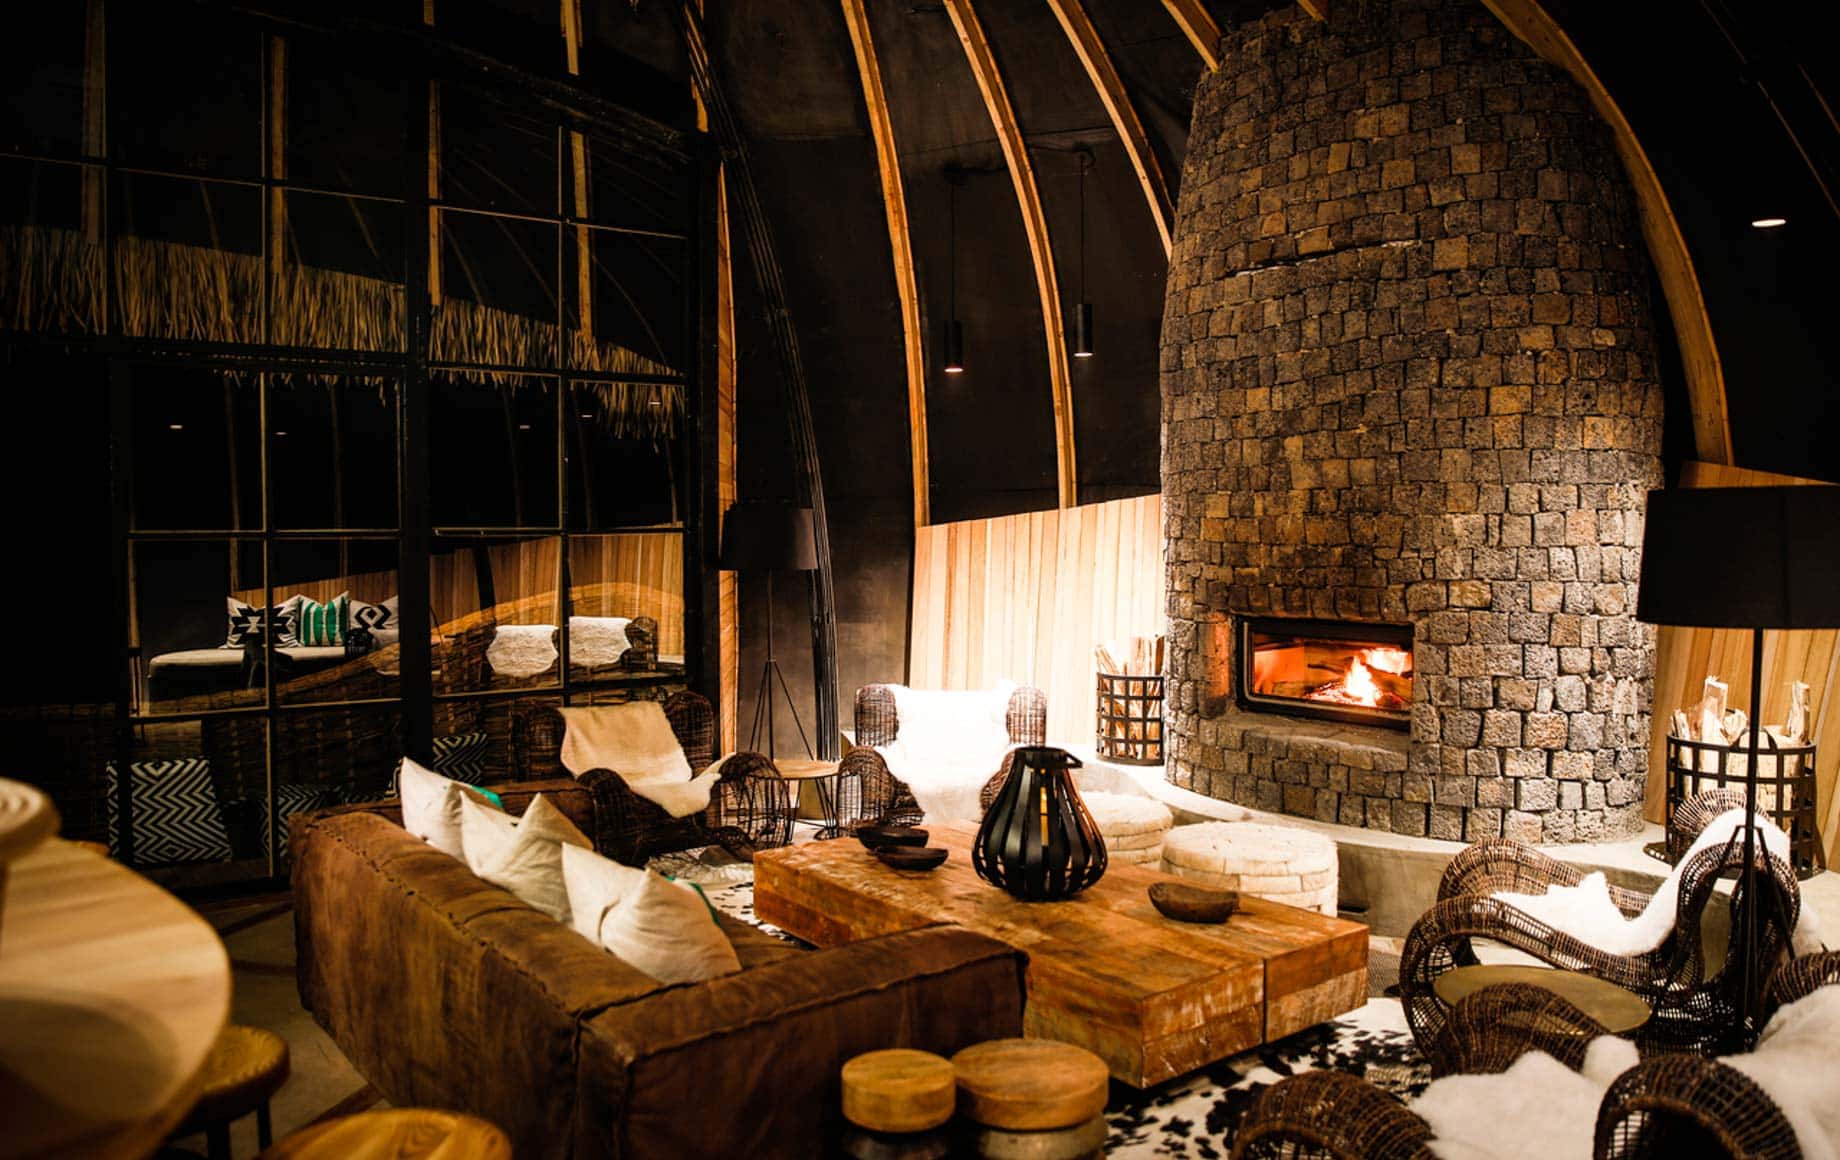 Warm and Cozy at Bisate Lodge in Africa